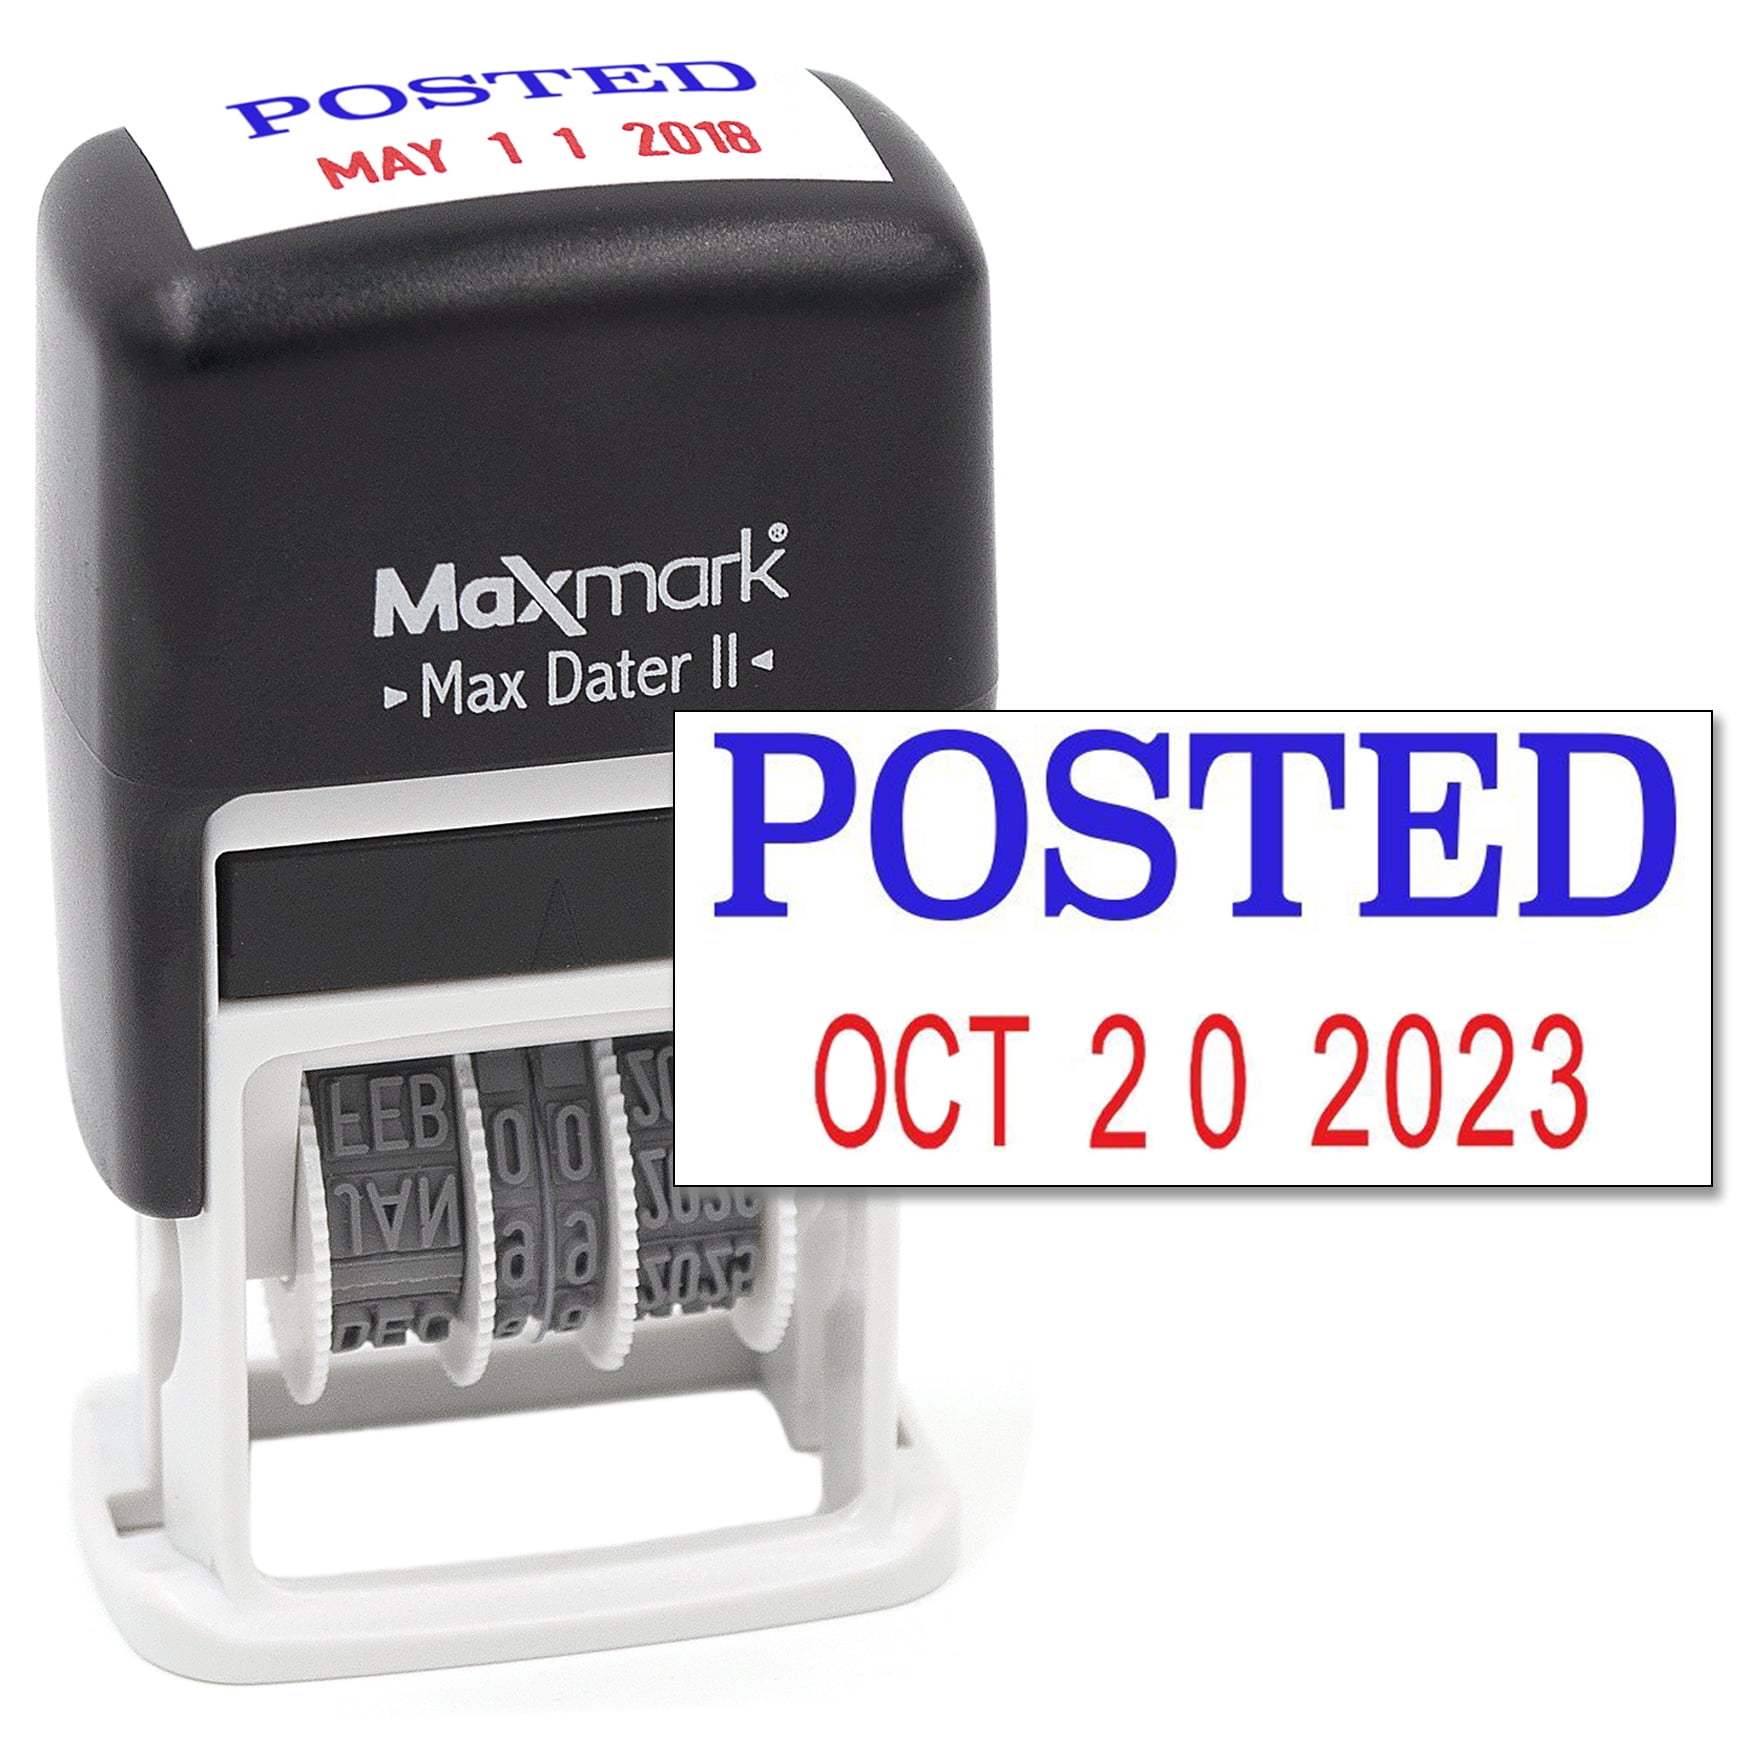 Red Ink Cancelled Office Self Inking Rubber Stamp E-5015 